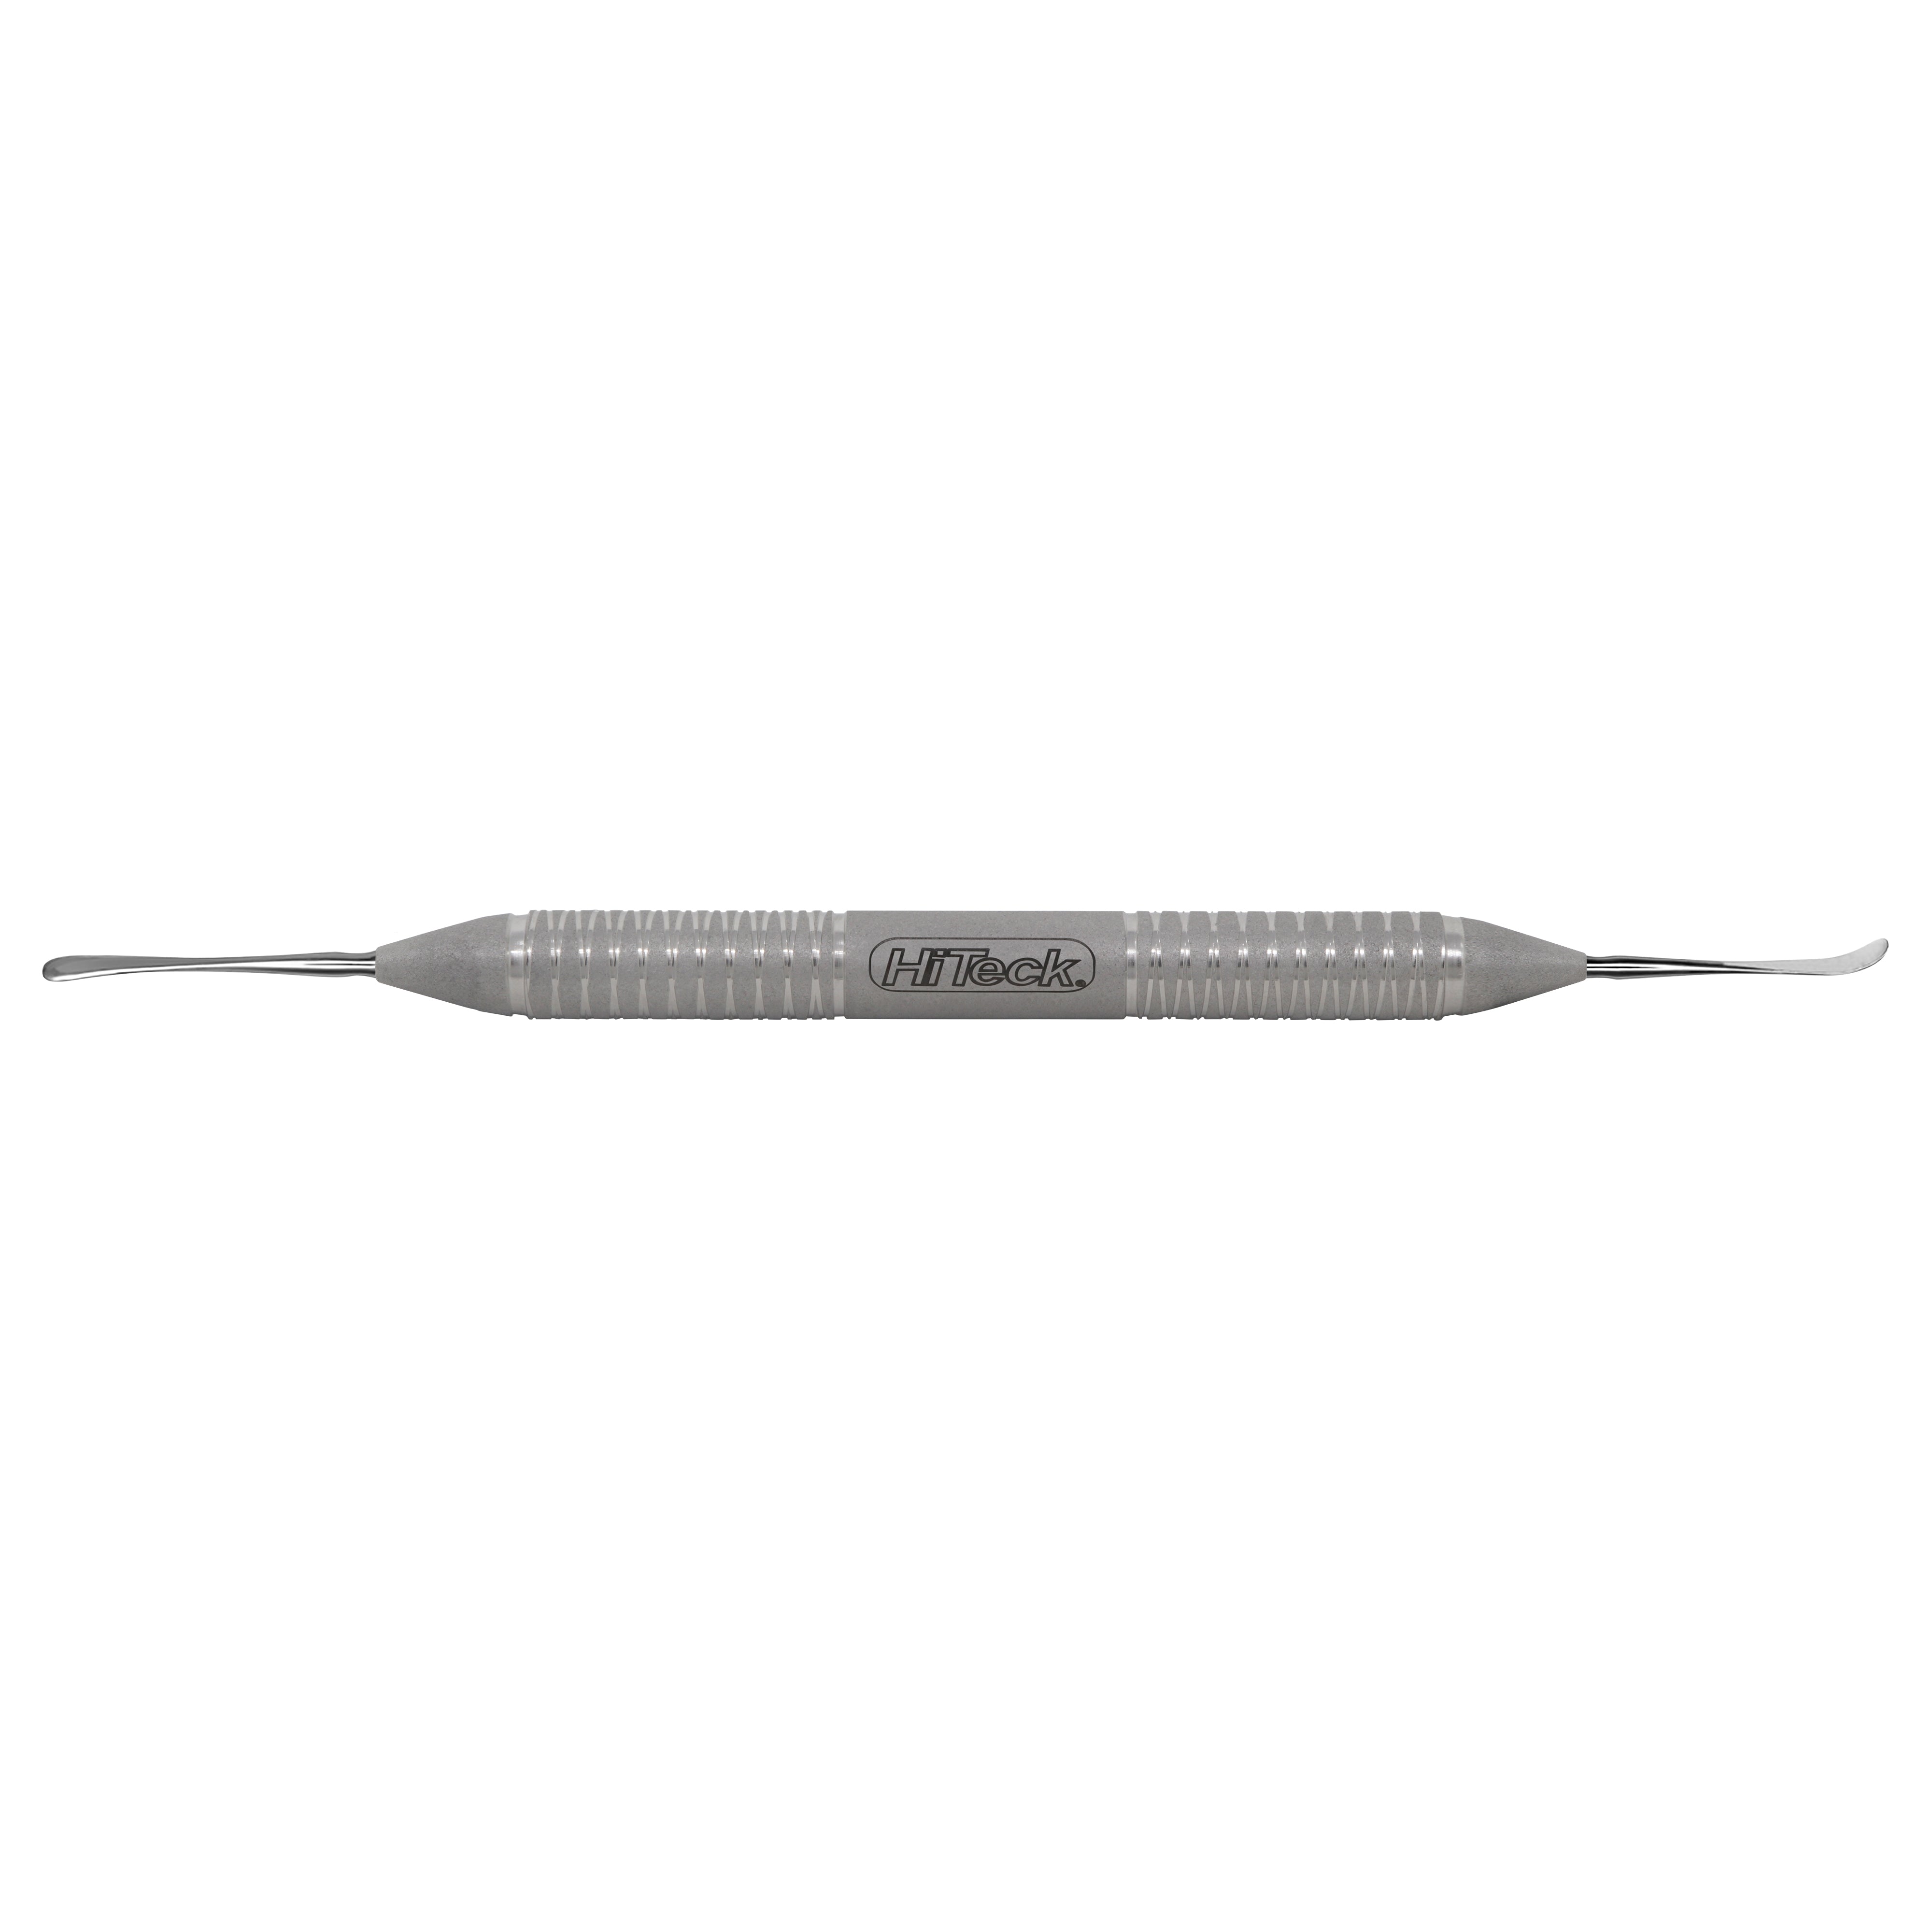 15 Freer Curved Periosteal - HiTeck Medical Instruments